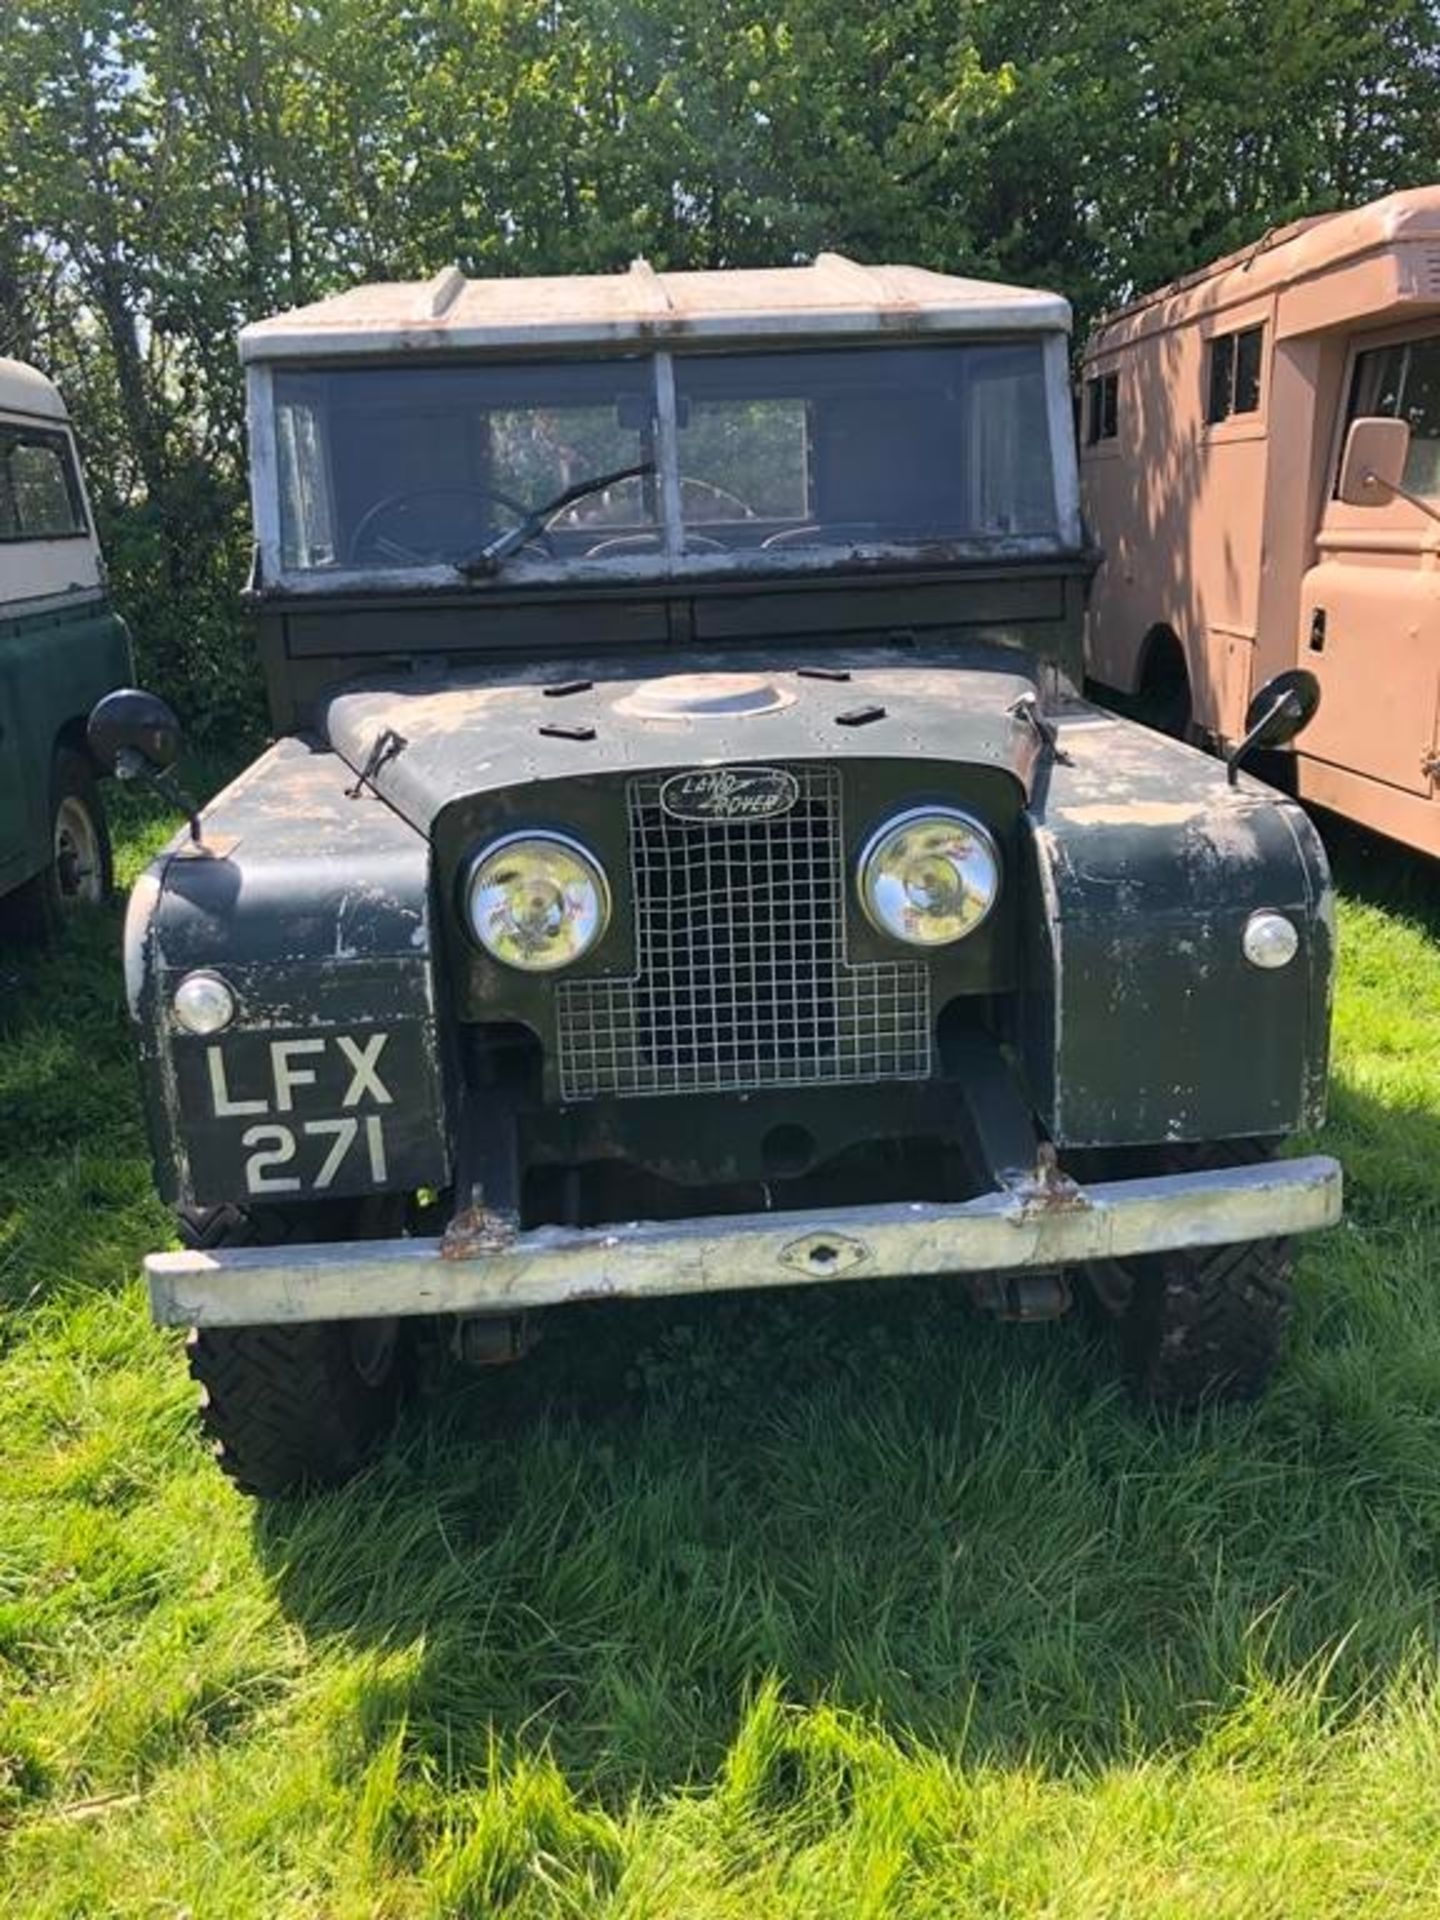 1957 Land Rover Series 1 Registration number LFX 271 109 inch pick up with a 2.0 diesel Plenty of - Image 2 of 21